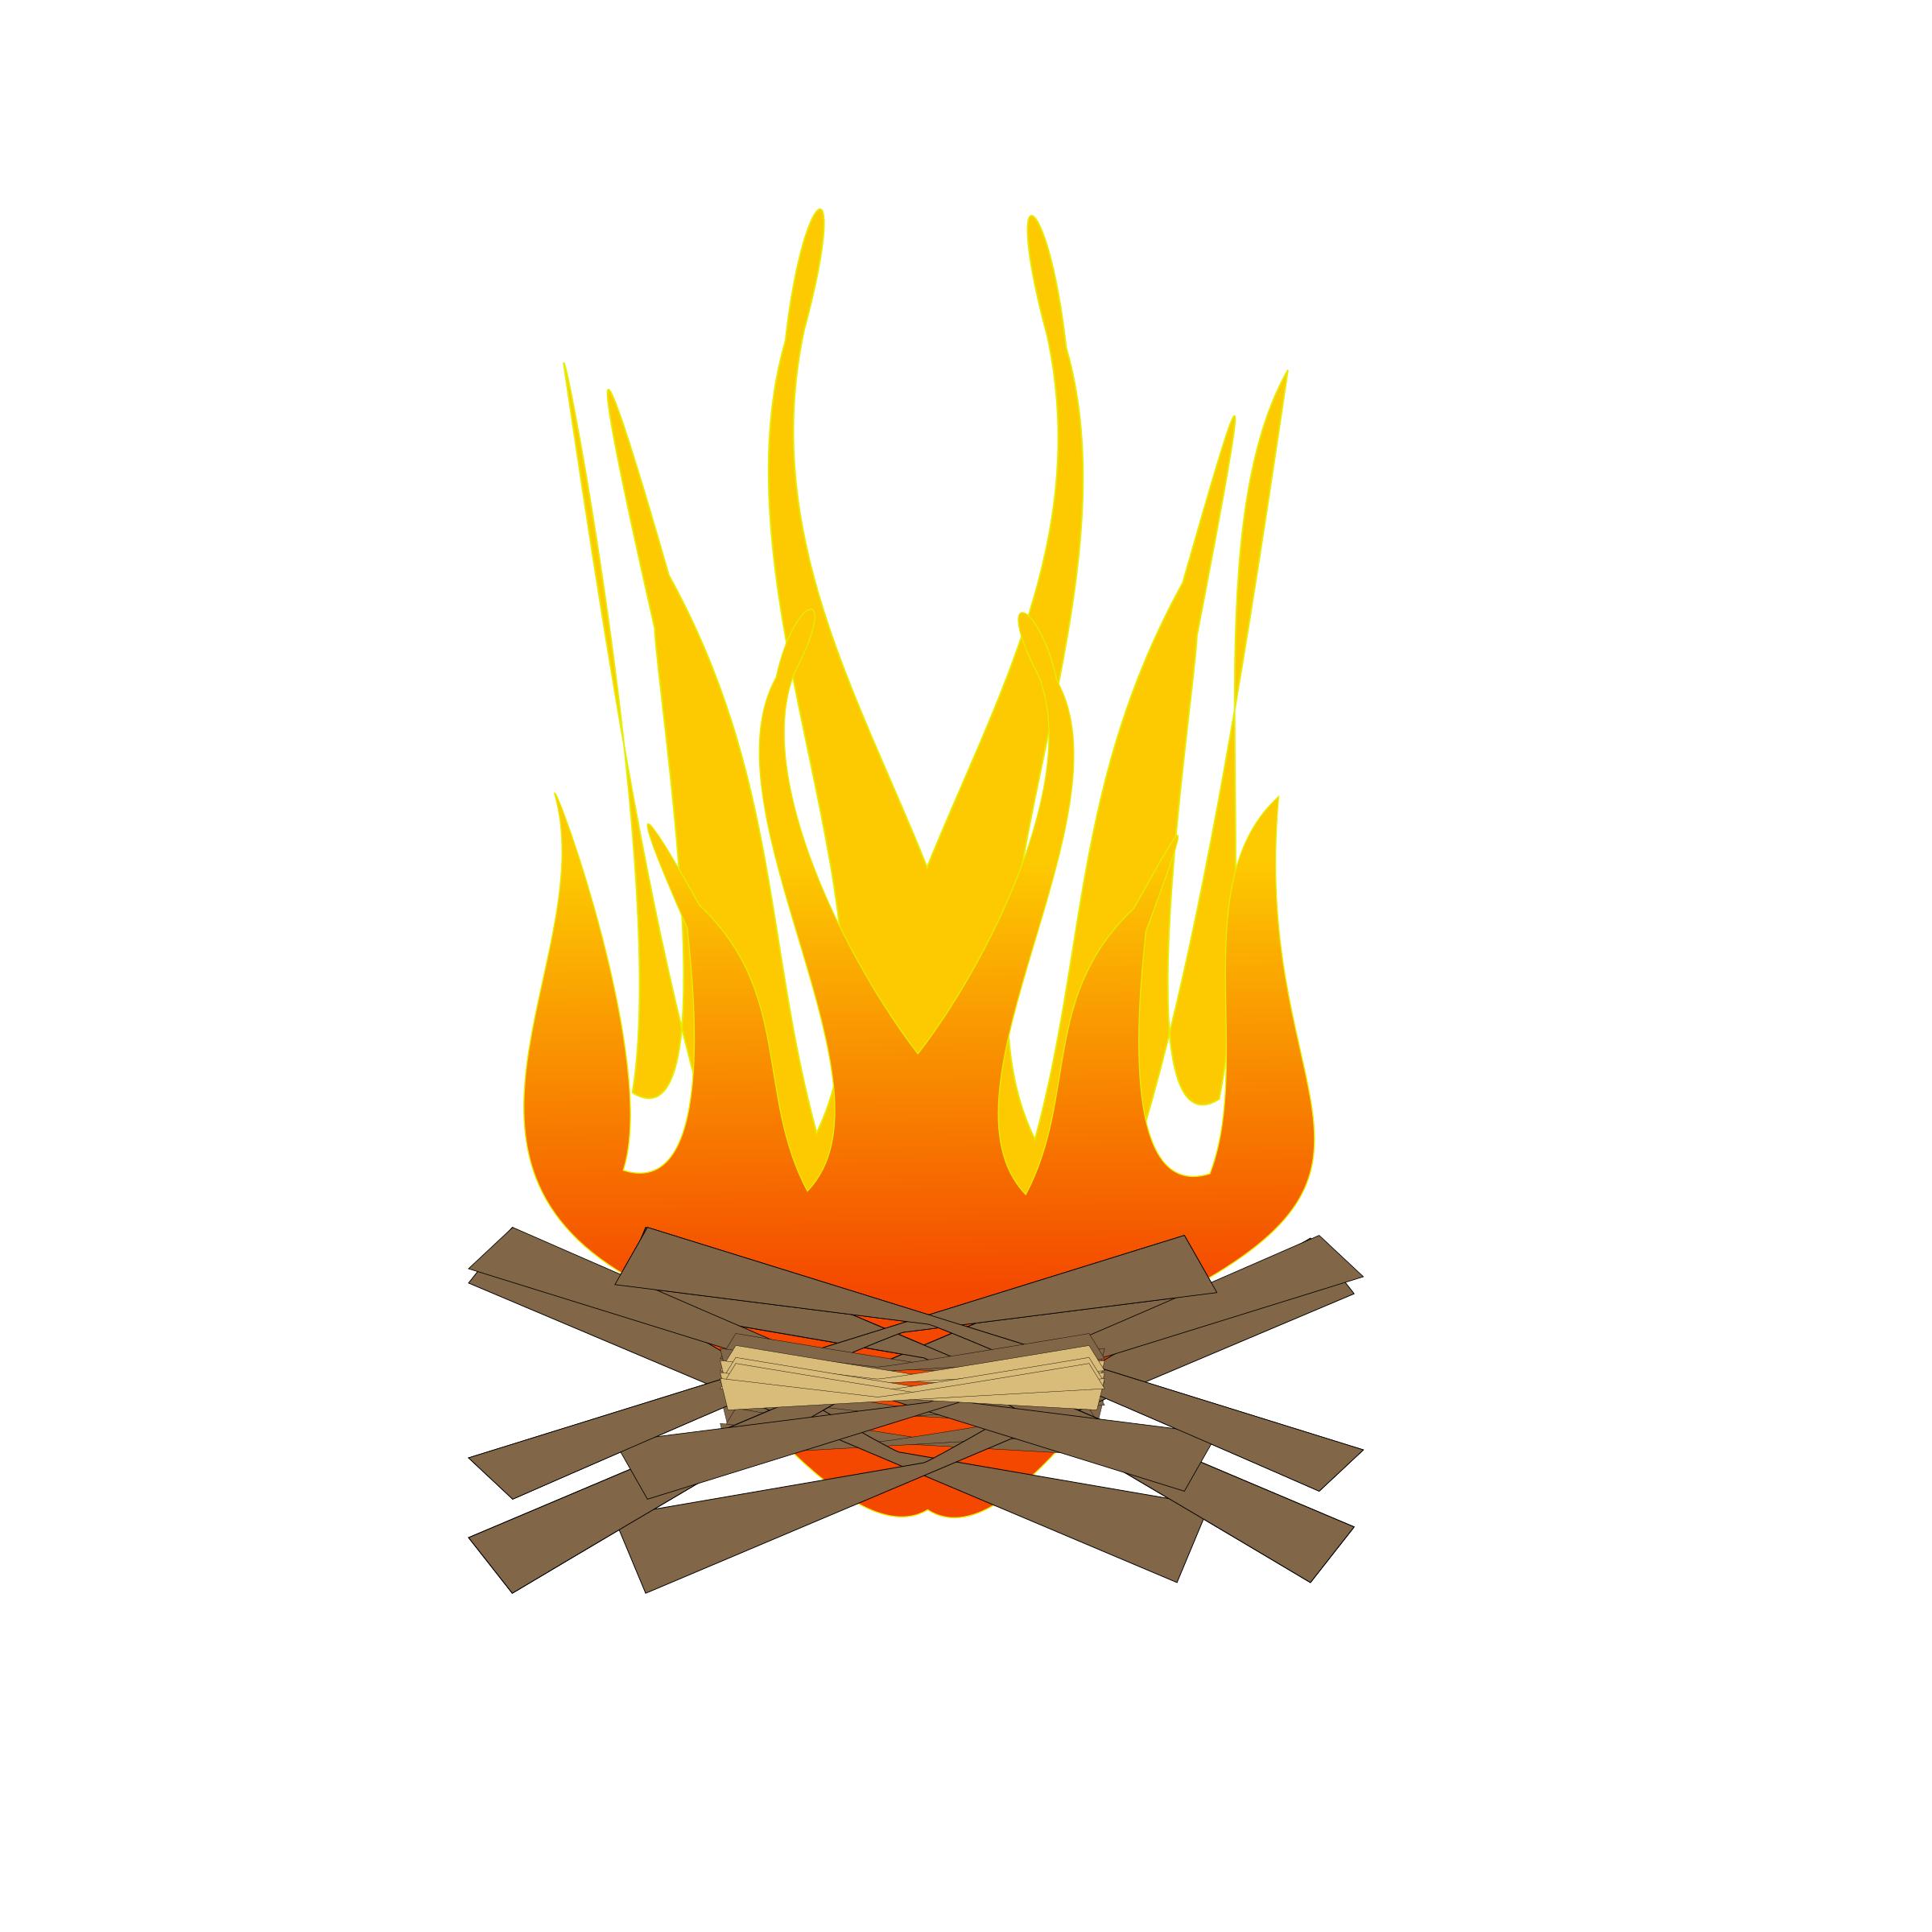 Fire png